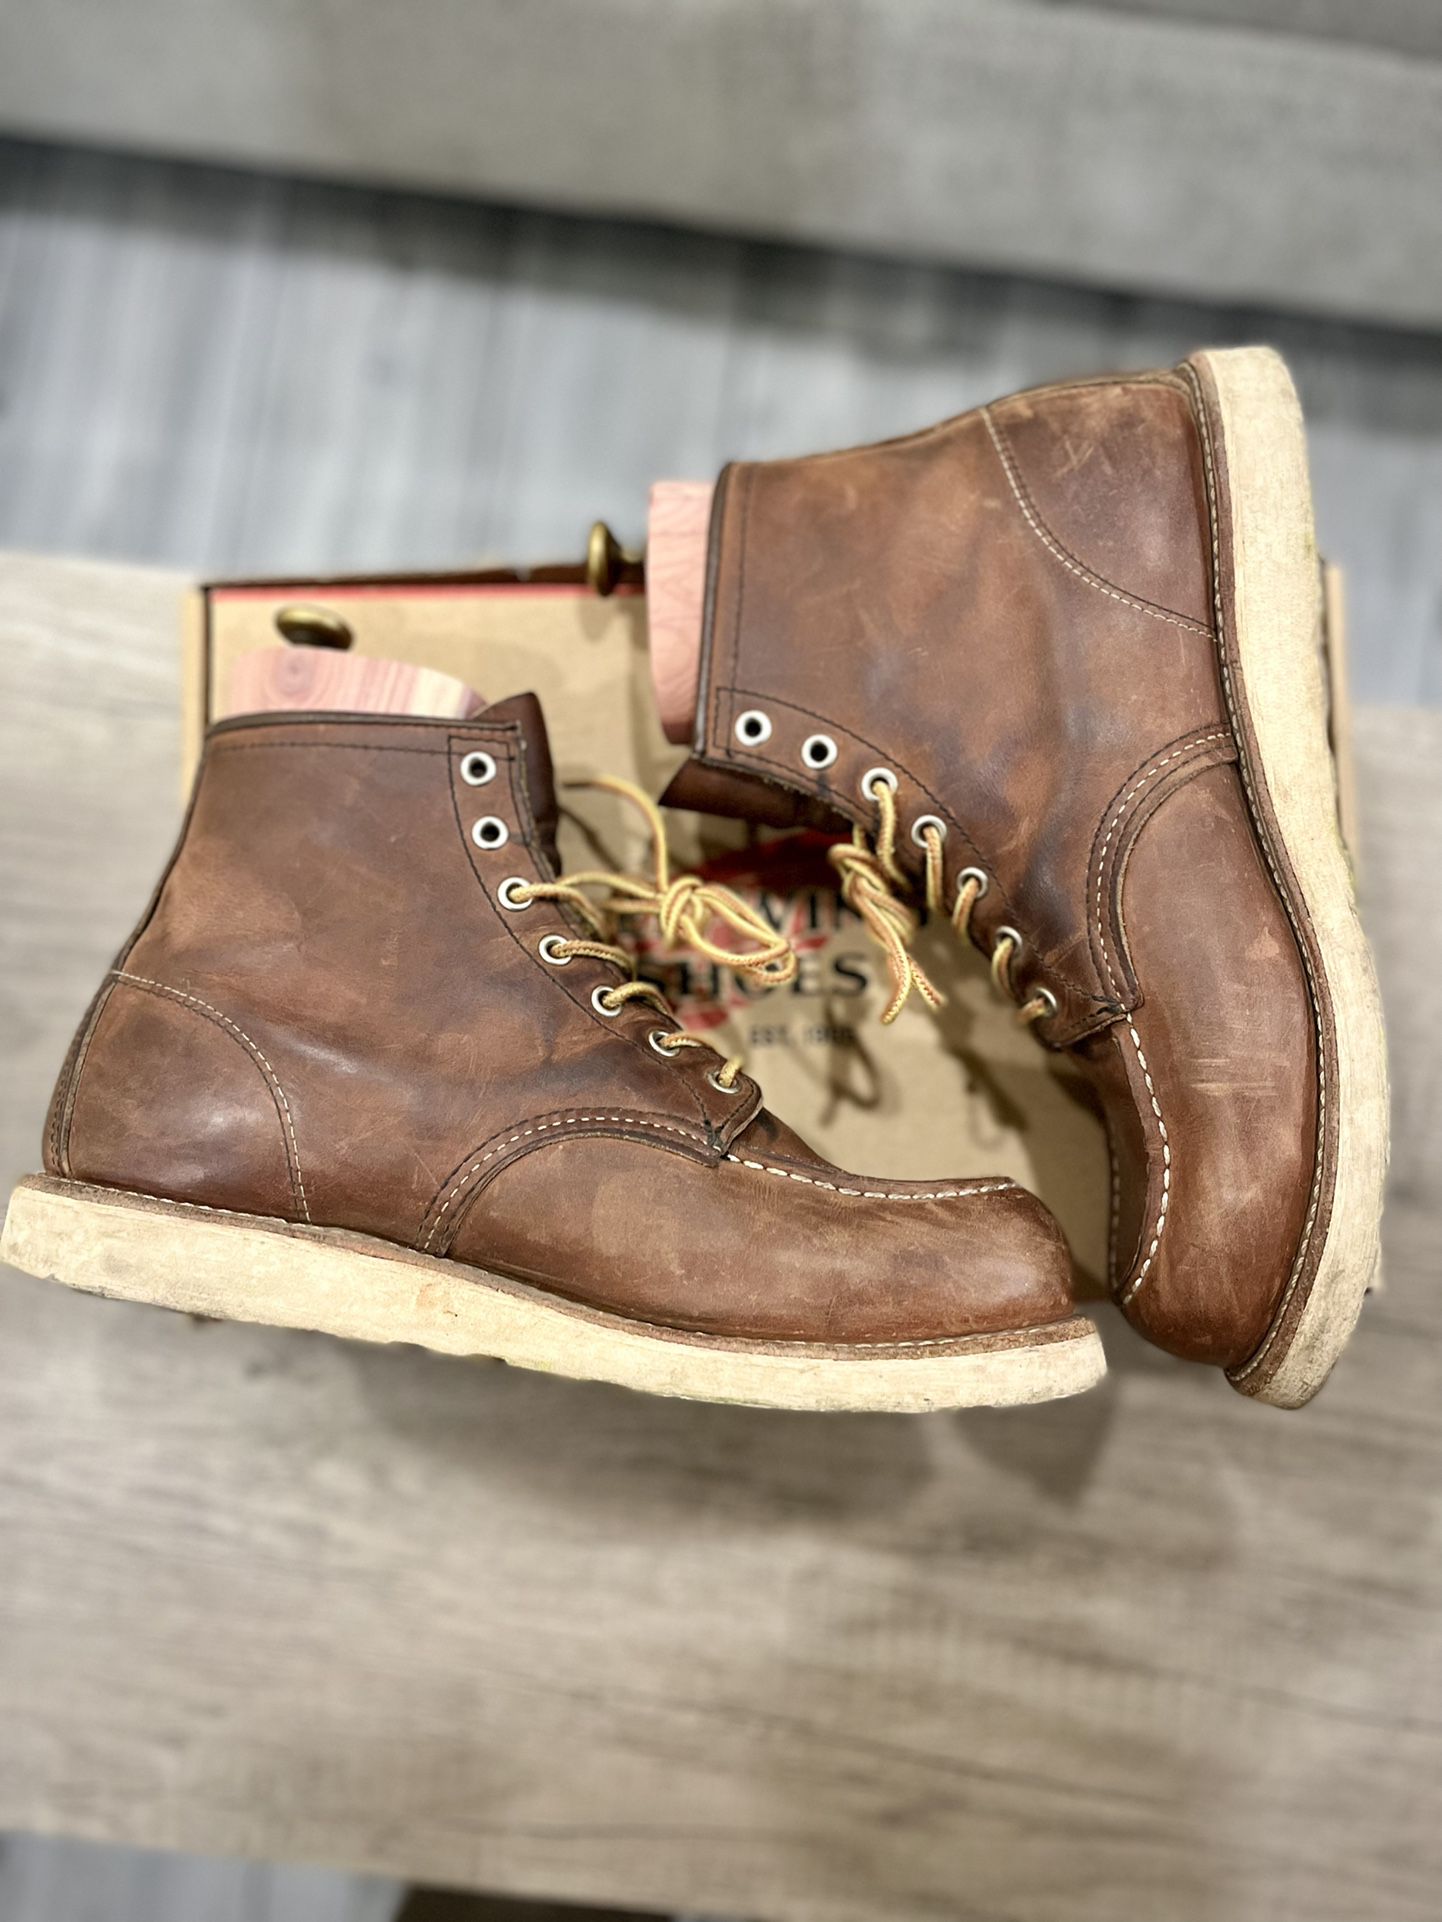 Red Wing Boots Model 8880 Size 9D